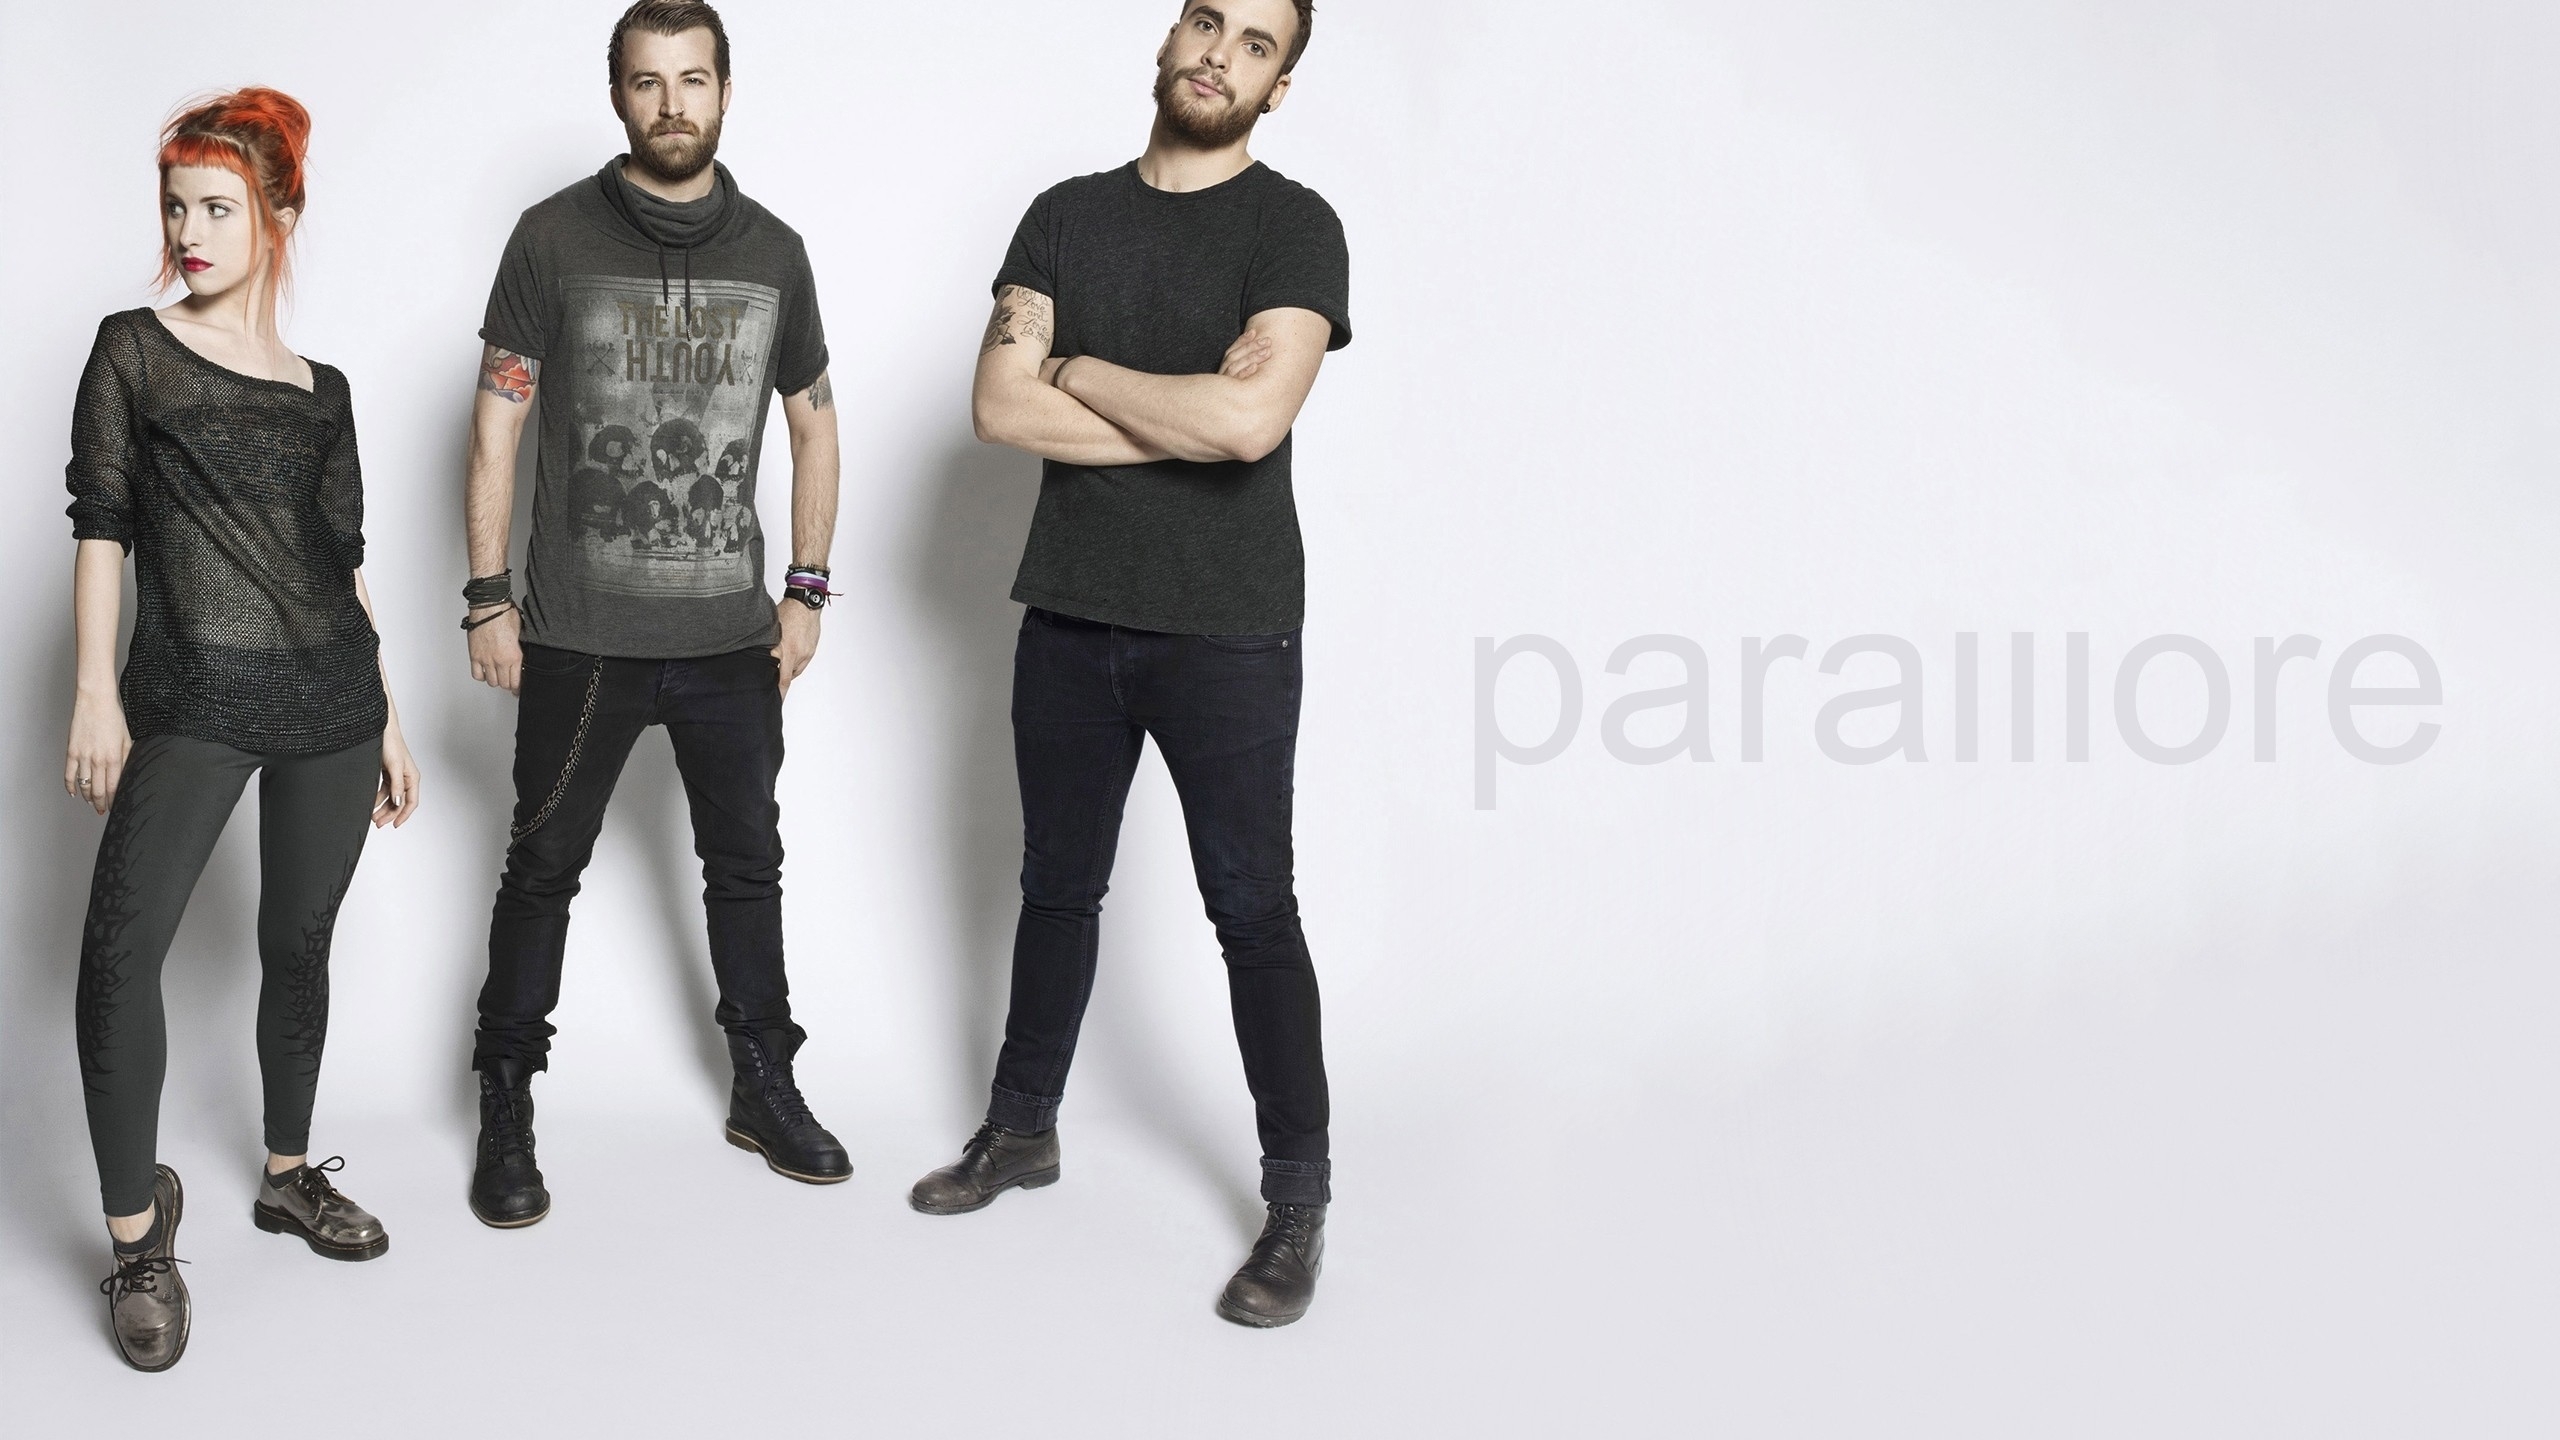 Paramore Band Poster for 2560x1440 HDTV resolution